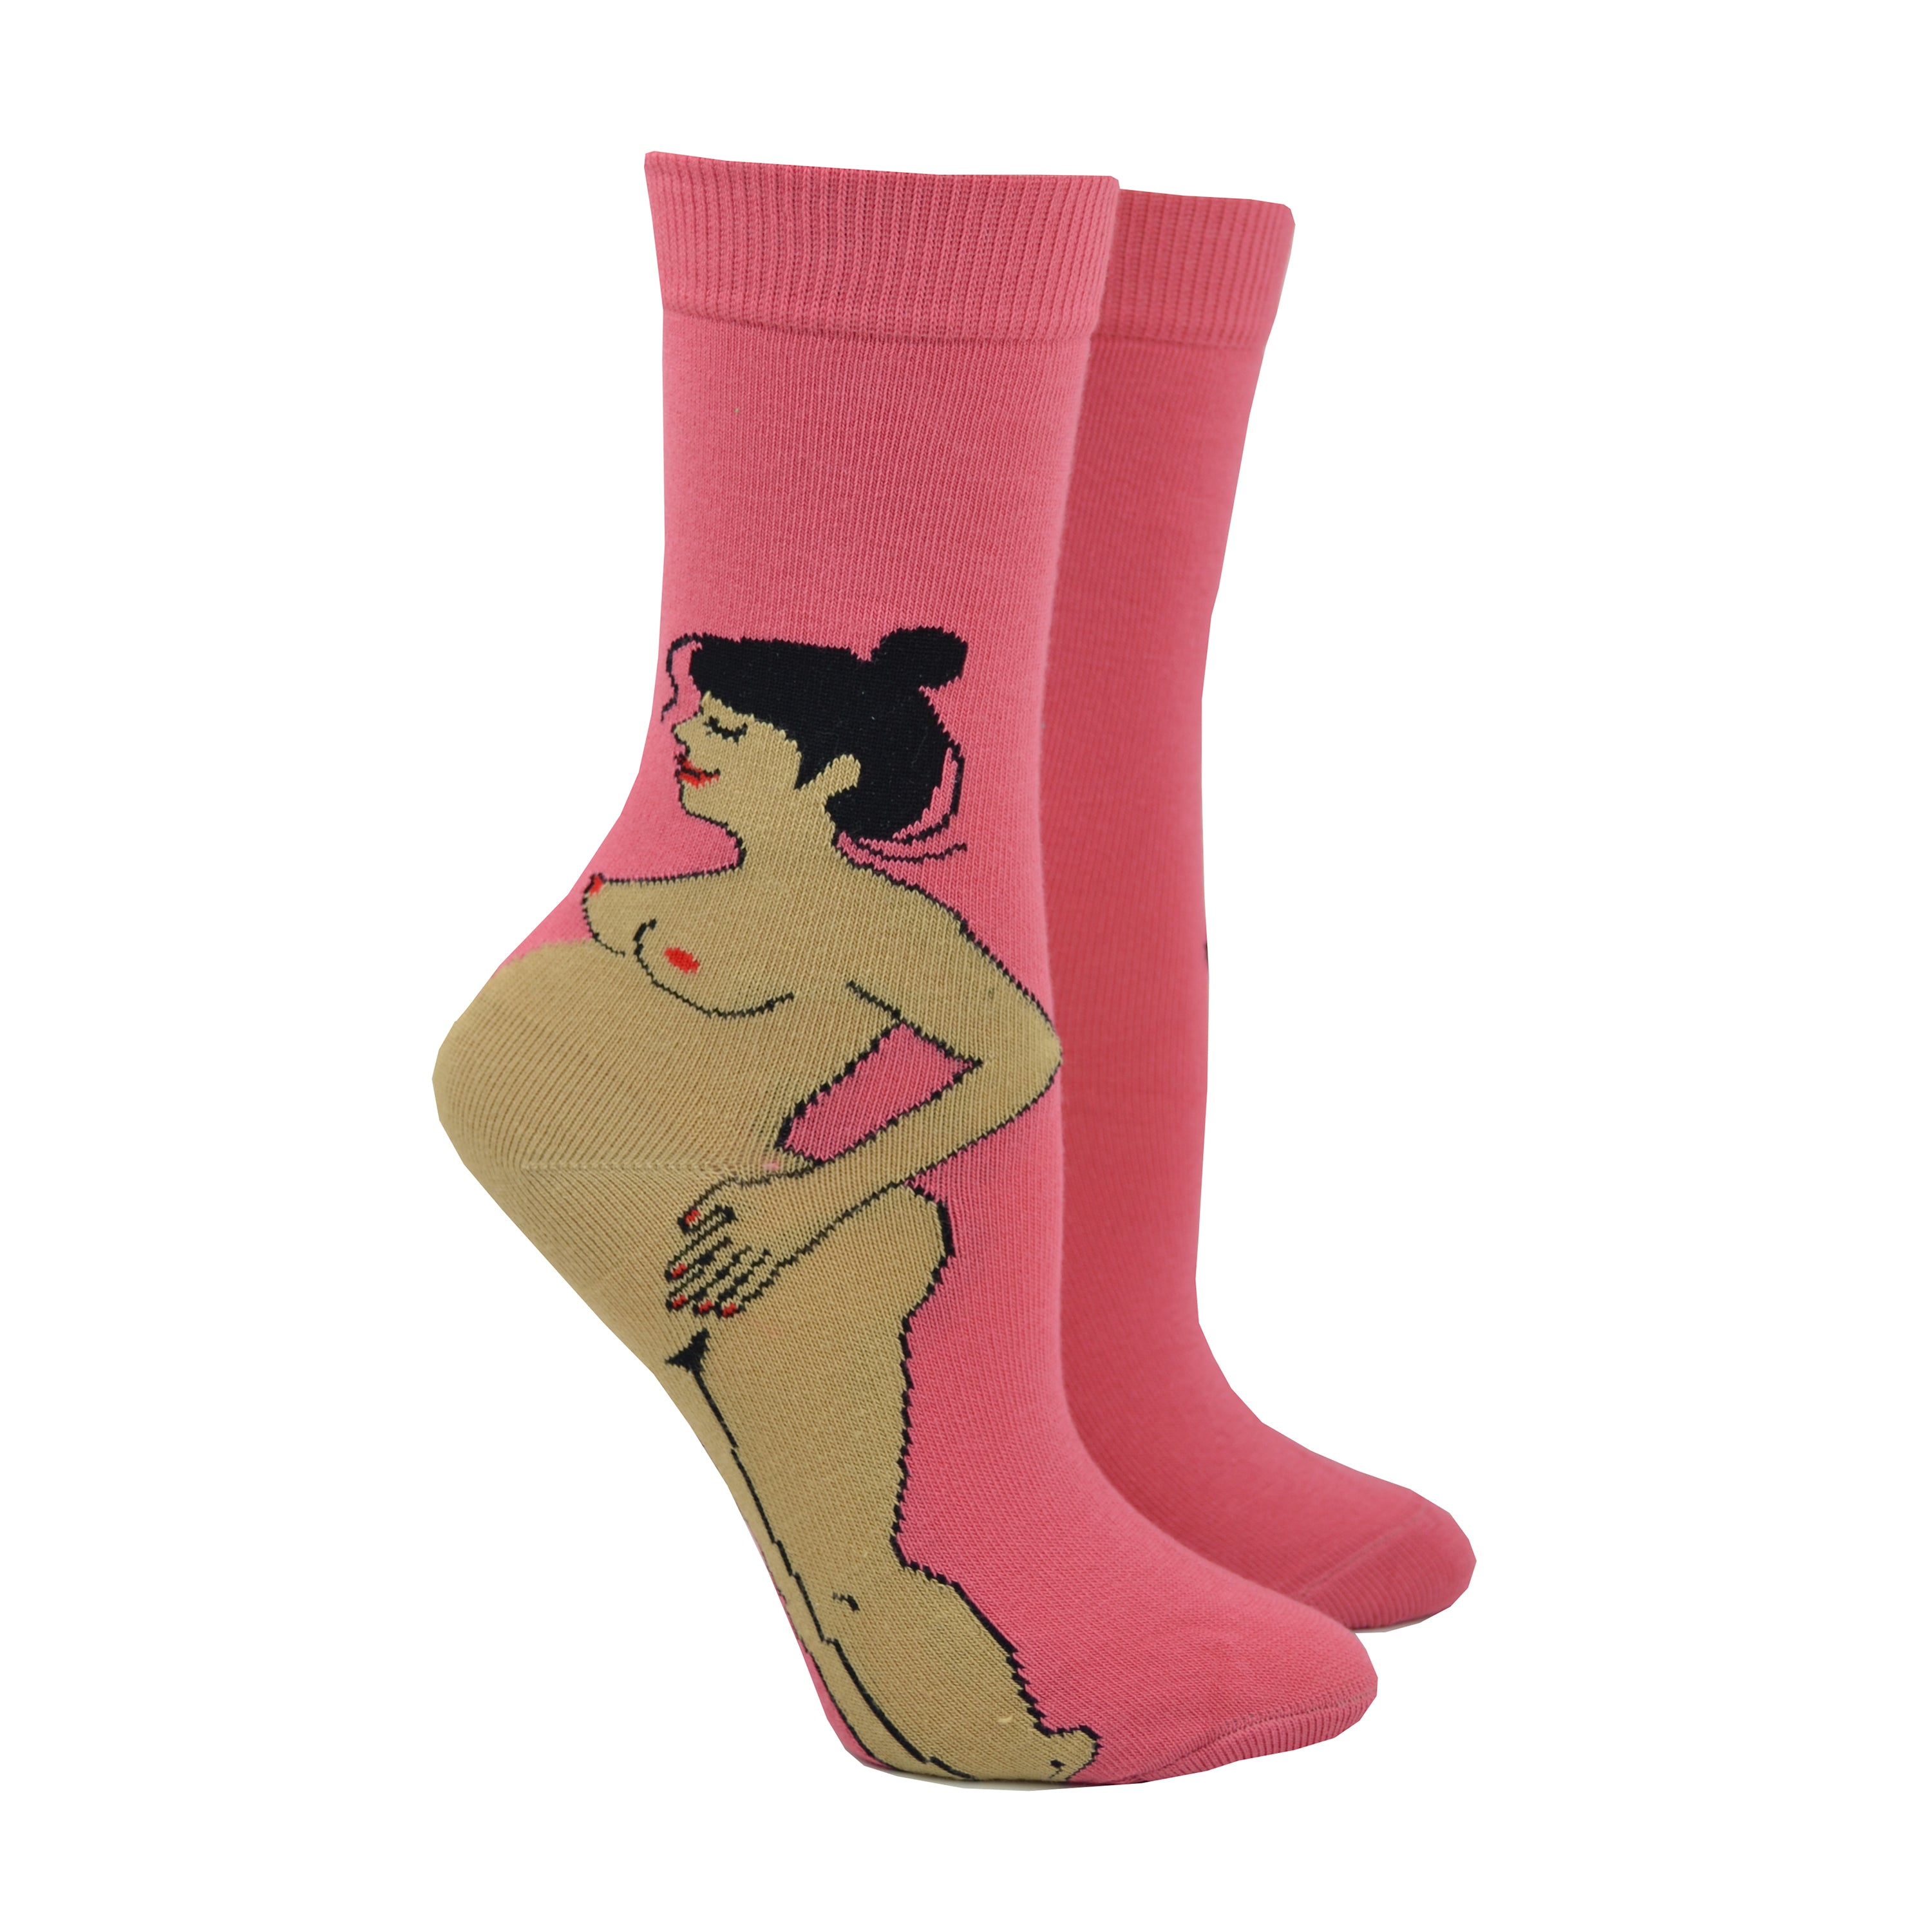 Shown on leg forms, bright pink CouCou Suzette socks with a naked, tan skinned pregnant woman. The woman's belly makes the ankle of the sock. 